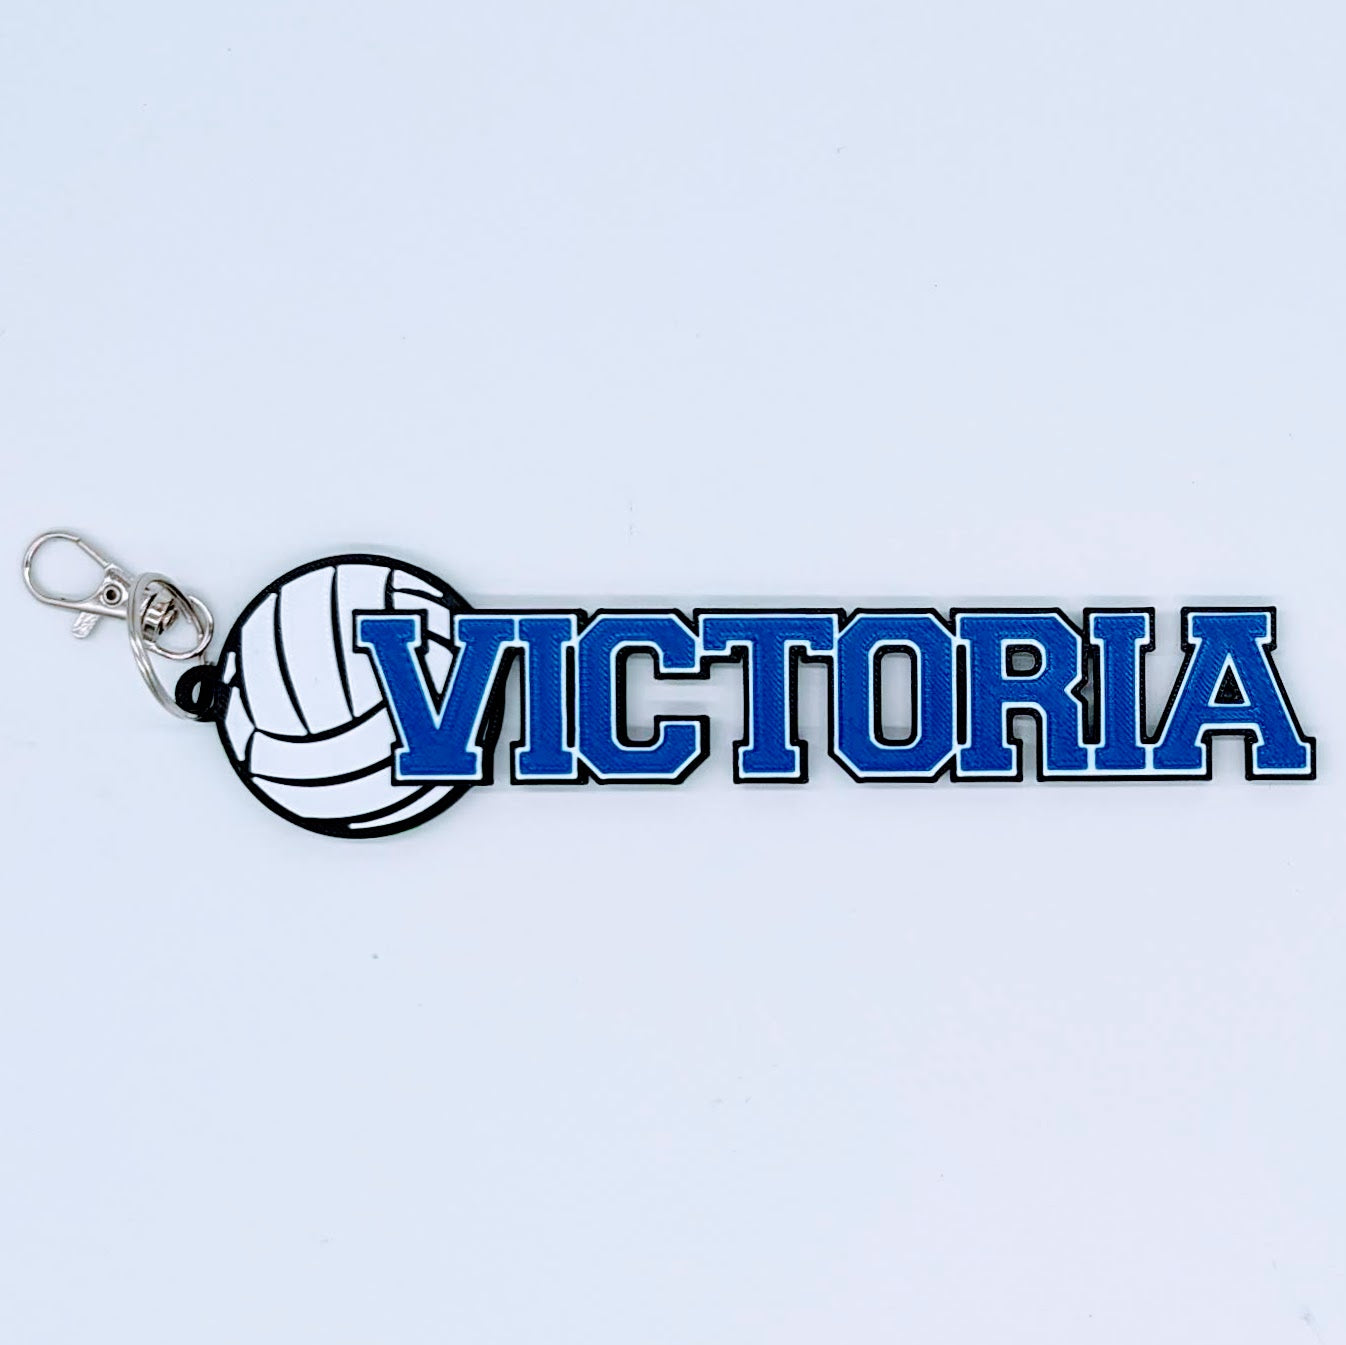 Volleyball - Customized Sports Bag Tag